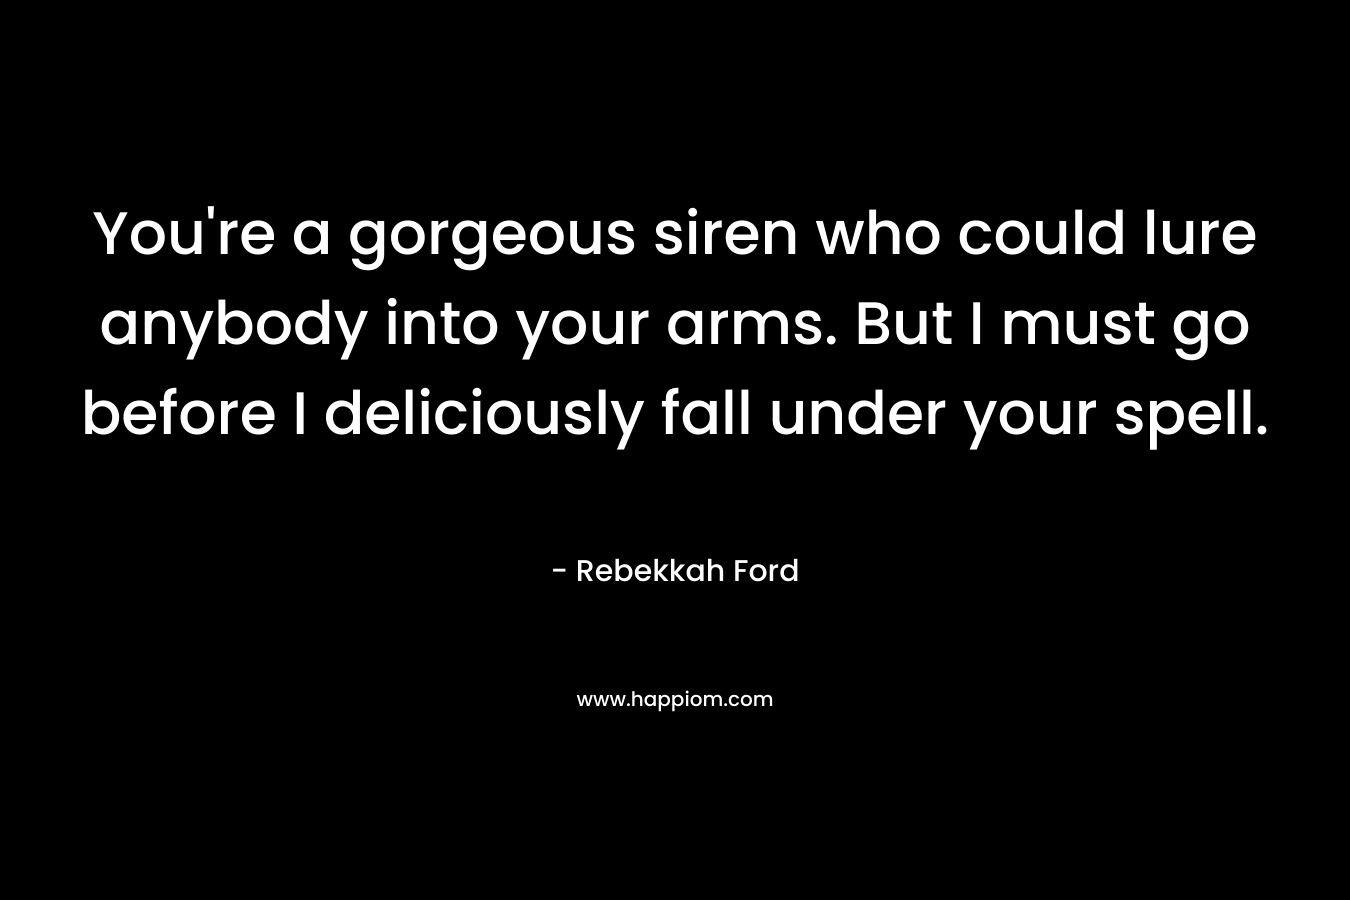 You’re a gorgeous siren who could lure anybody into your arms. But I must go before I deliciously fall under your spell. – Rebekkah Ford